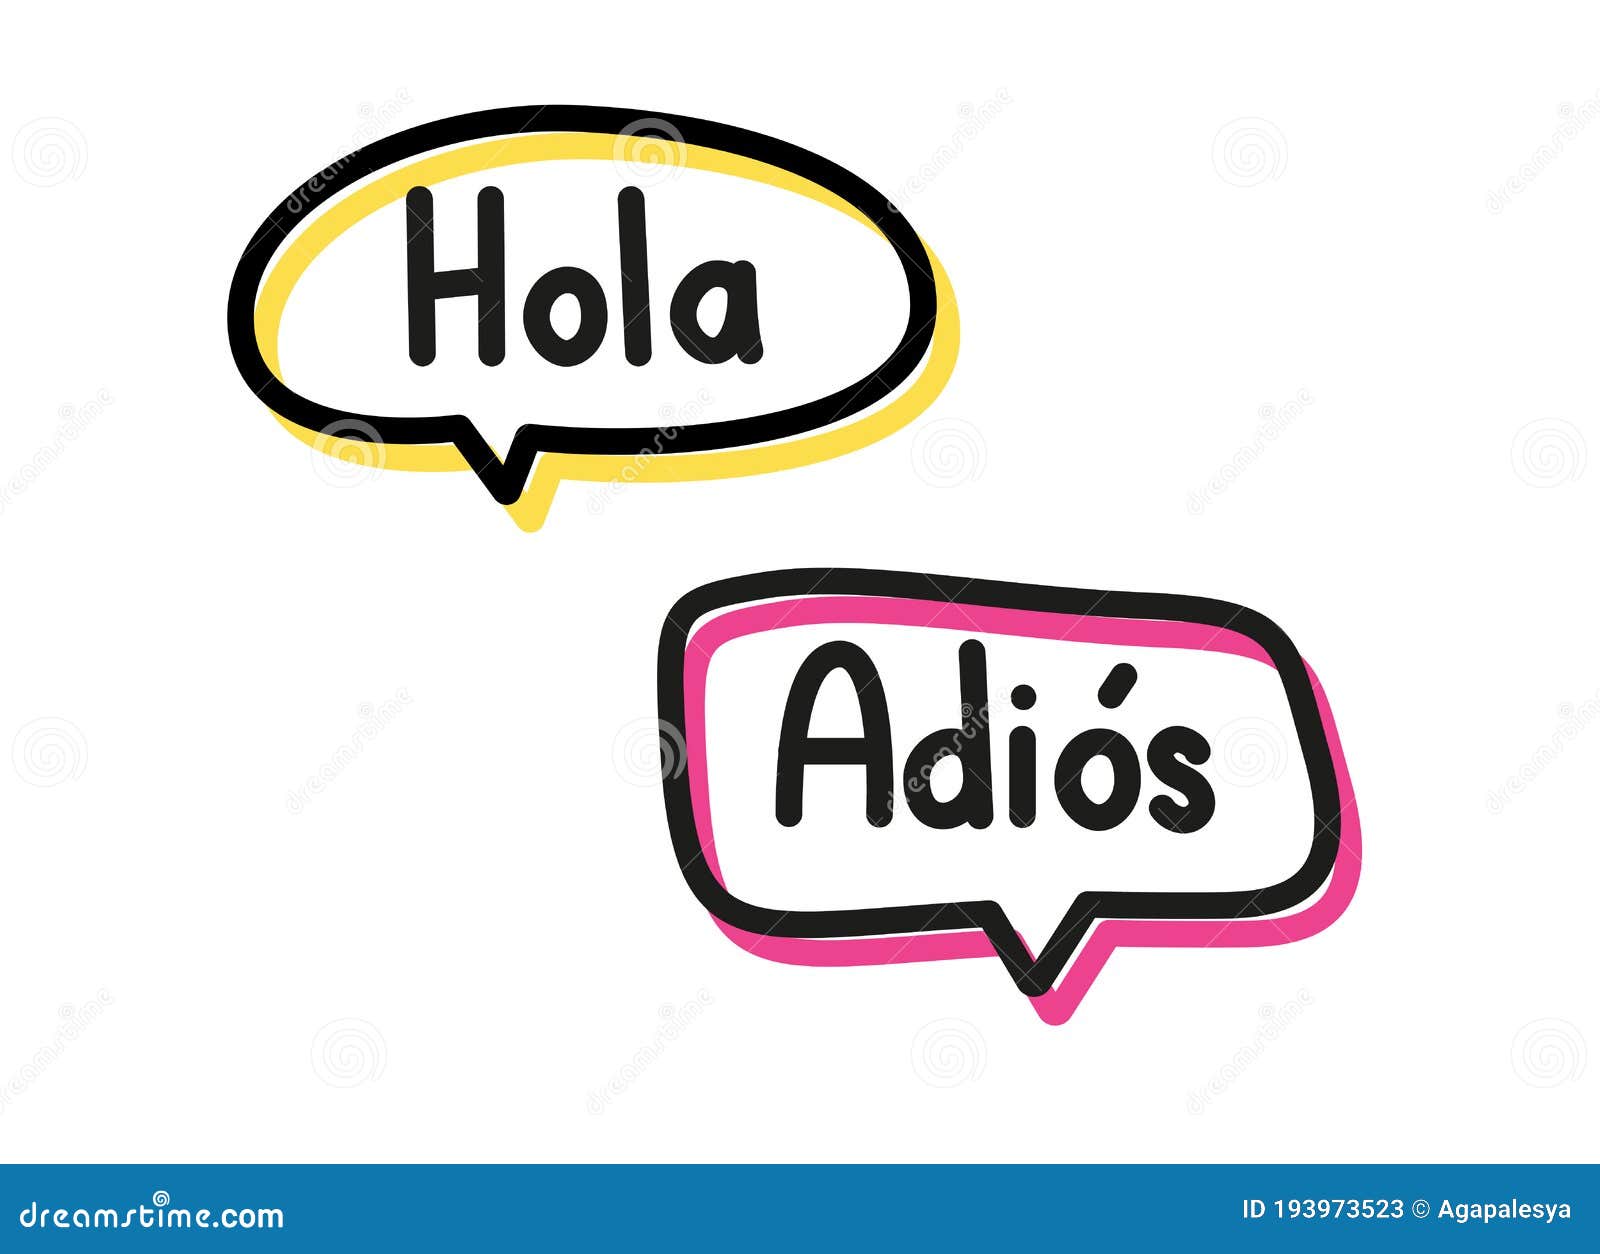 hola adios. handwritten lettering . black  text in pink and yellow neon speech bubbles.